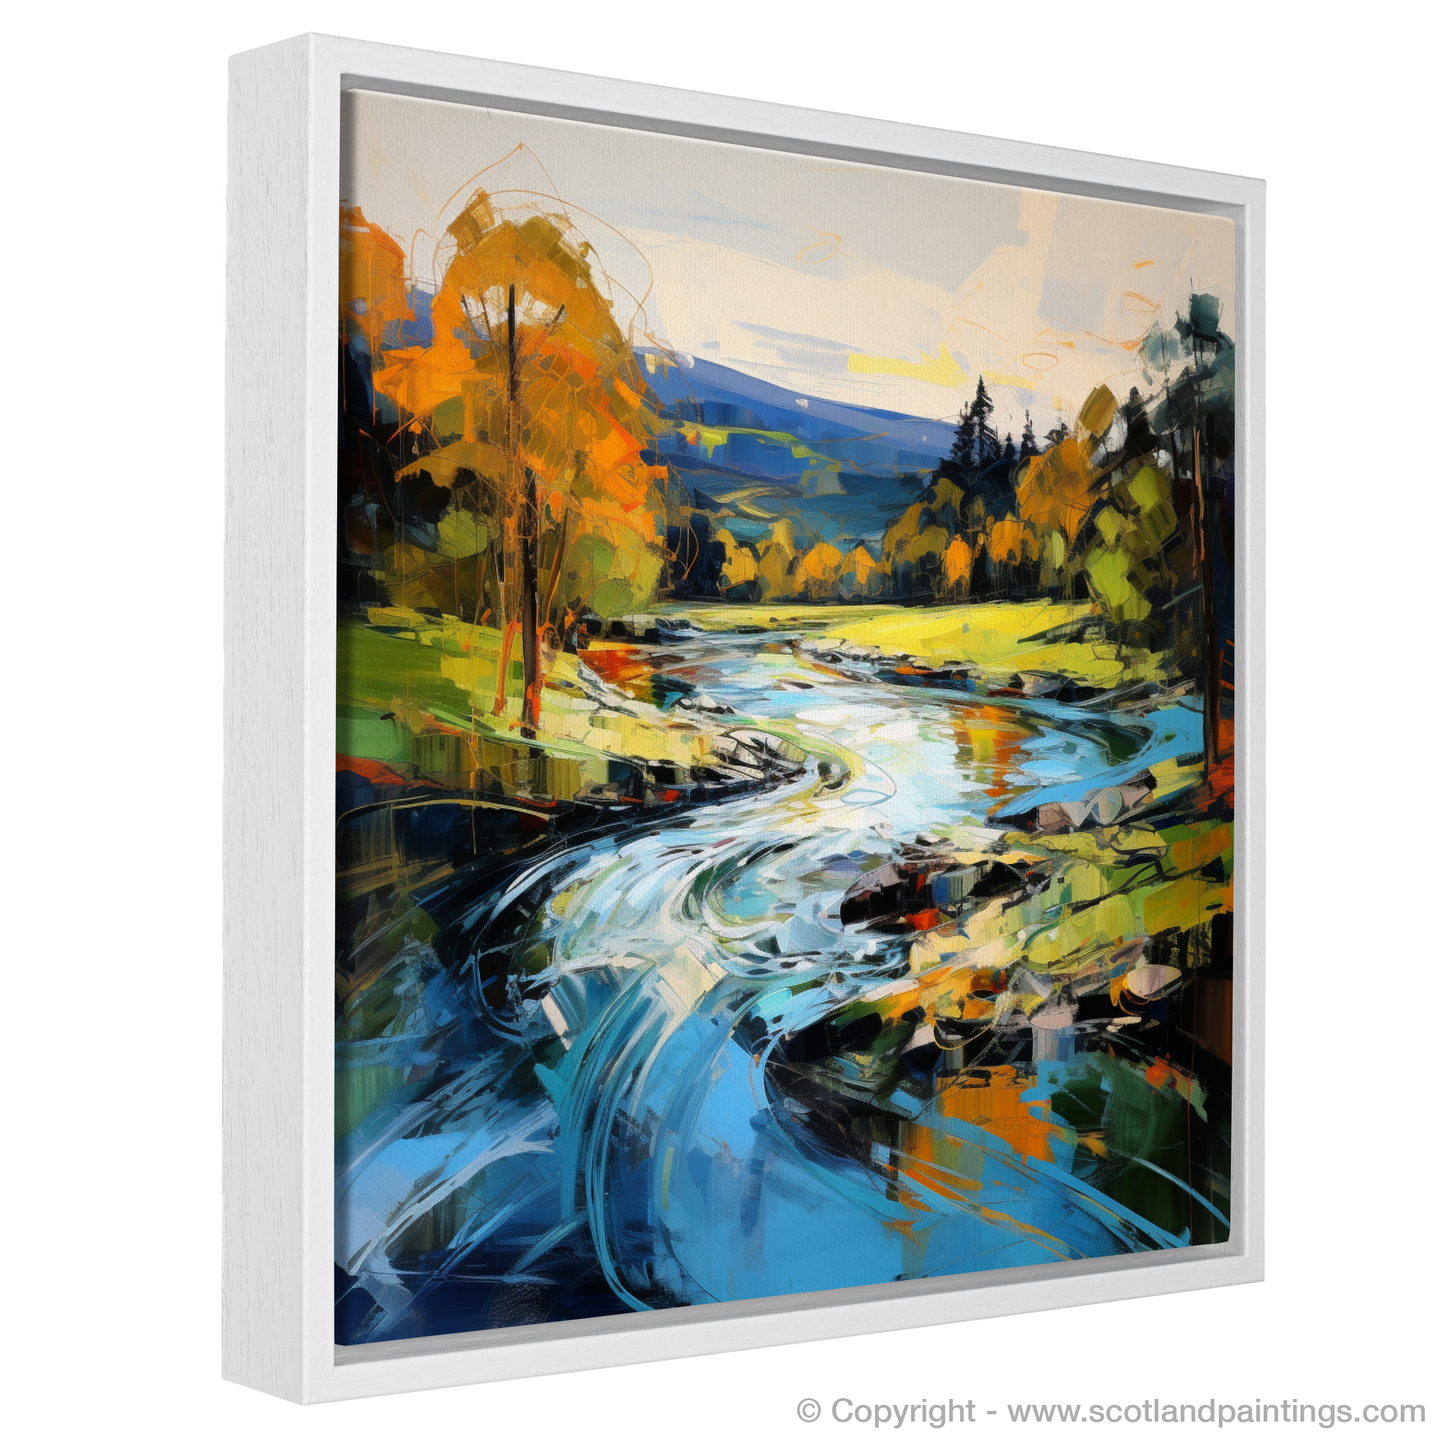 Painting and Art Print of River Lyon, Perthshire entitled "Autumnal Glow of River Lyon: An Expressionist Tribute".